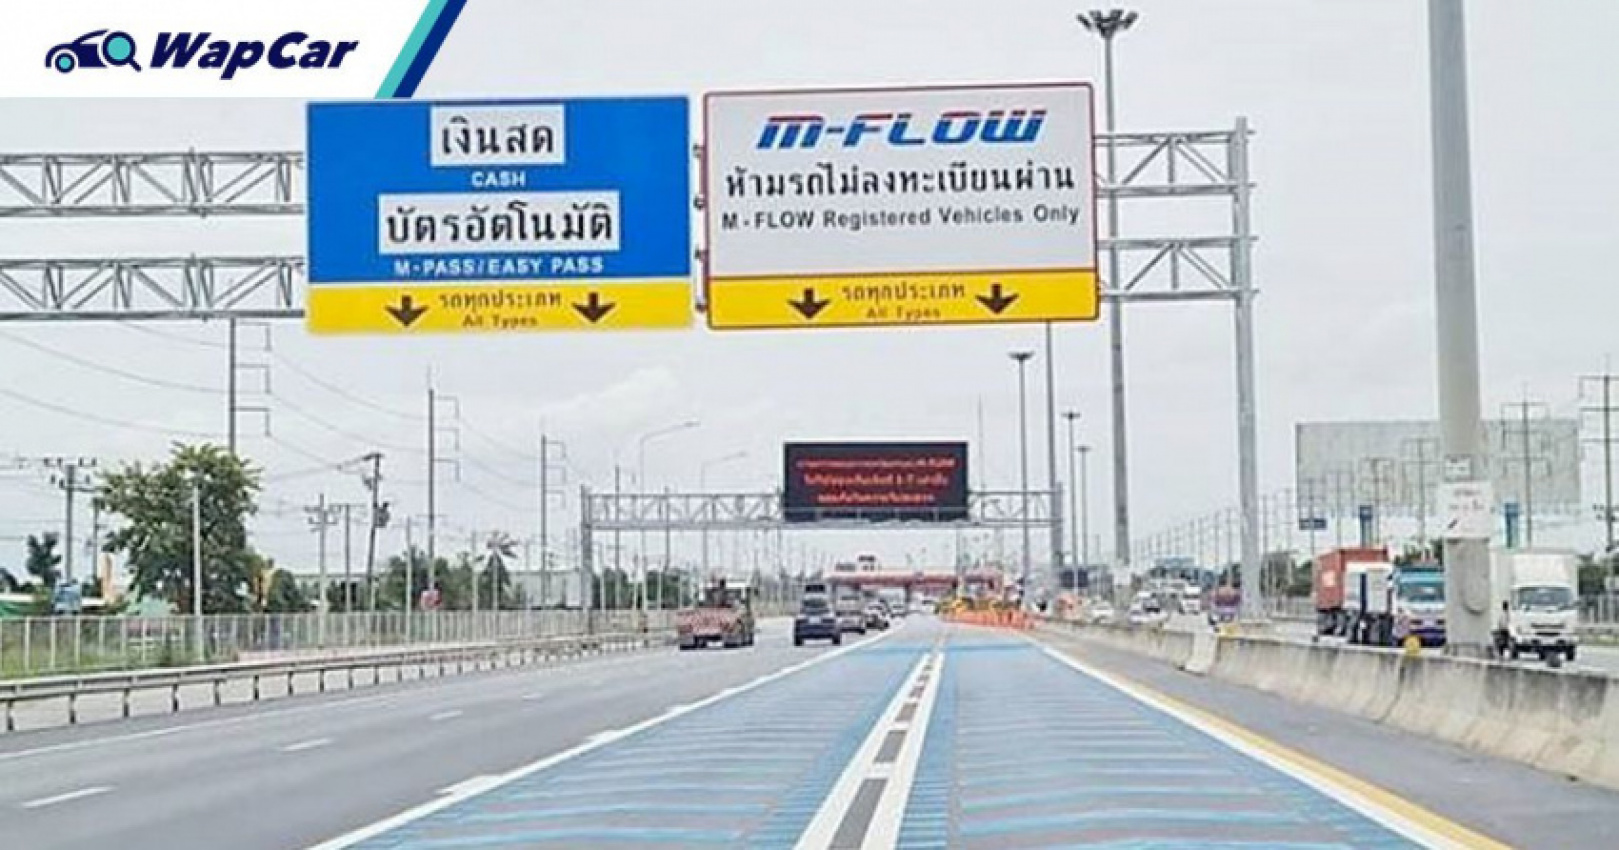 apple, apple car, autos, cars, as malaysia grapples with rfid, thailand moves on to number plate recognition toll payments